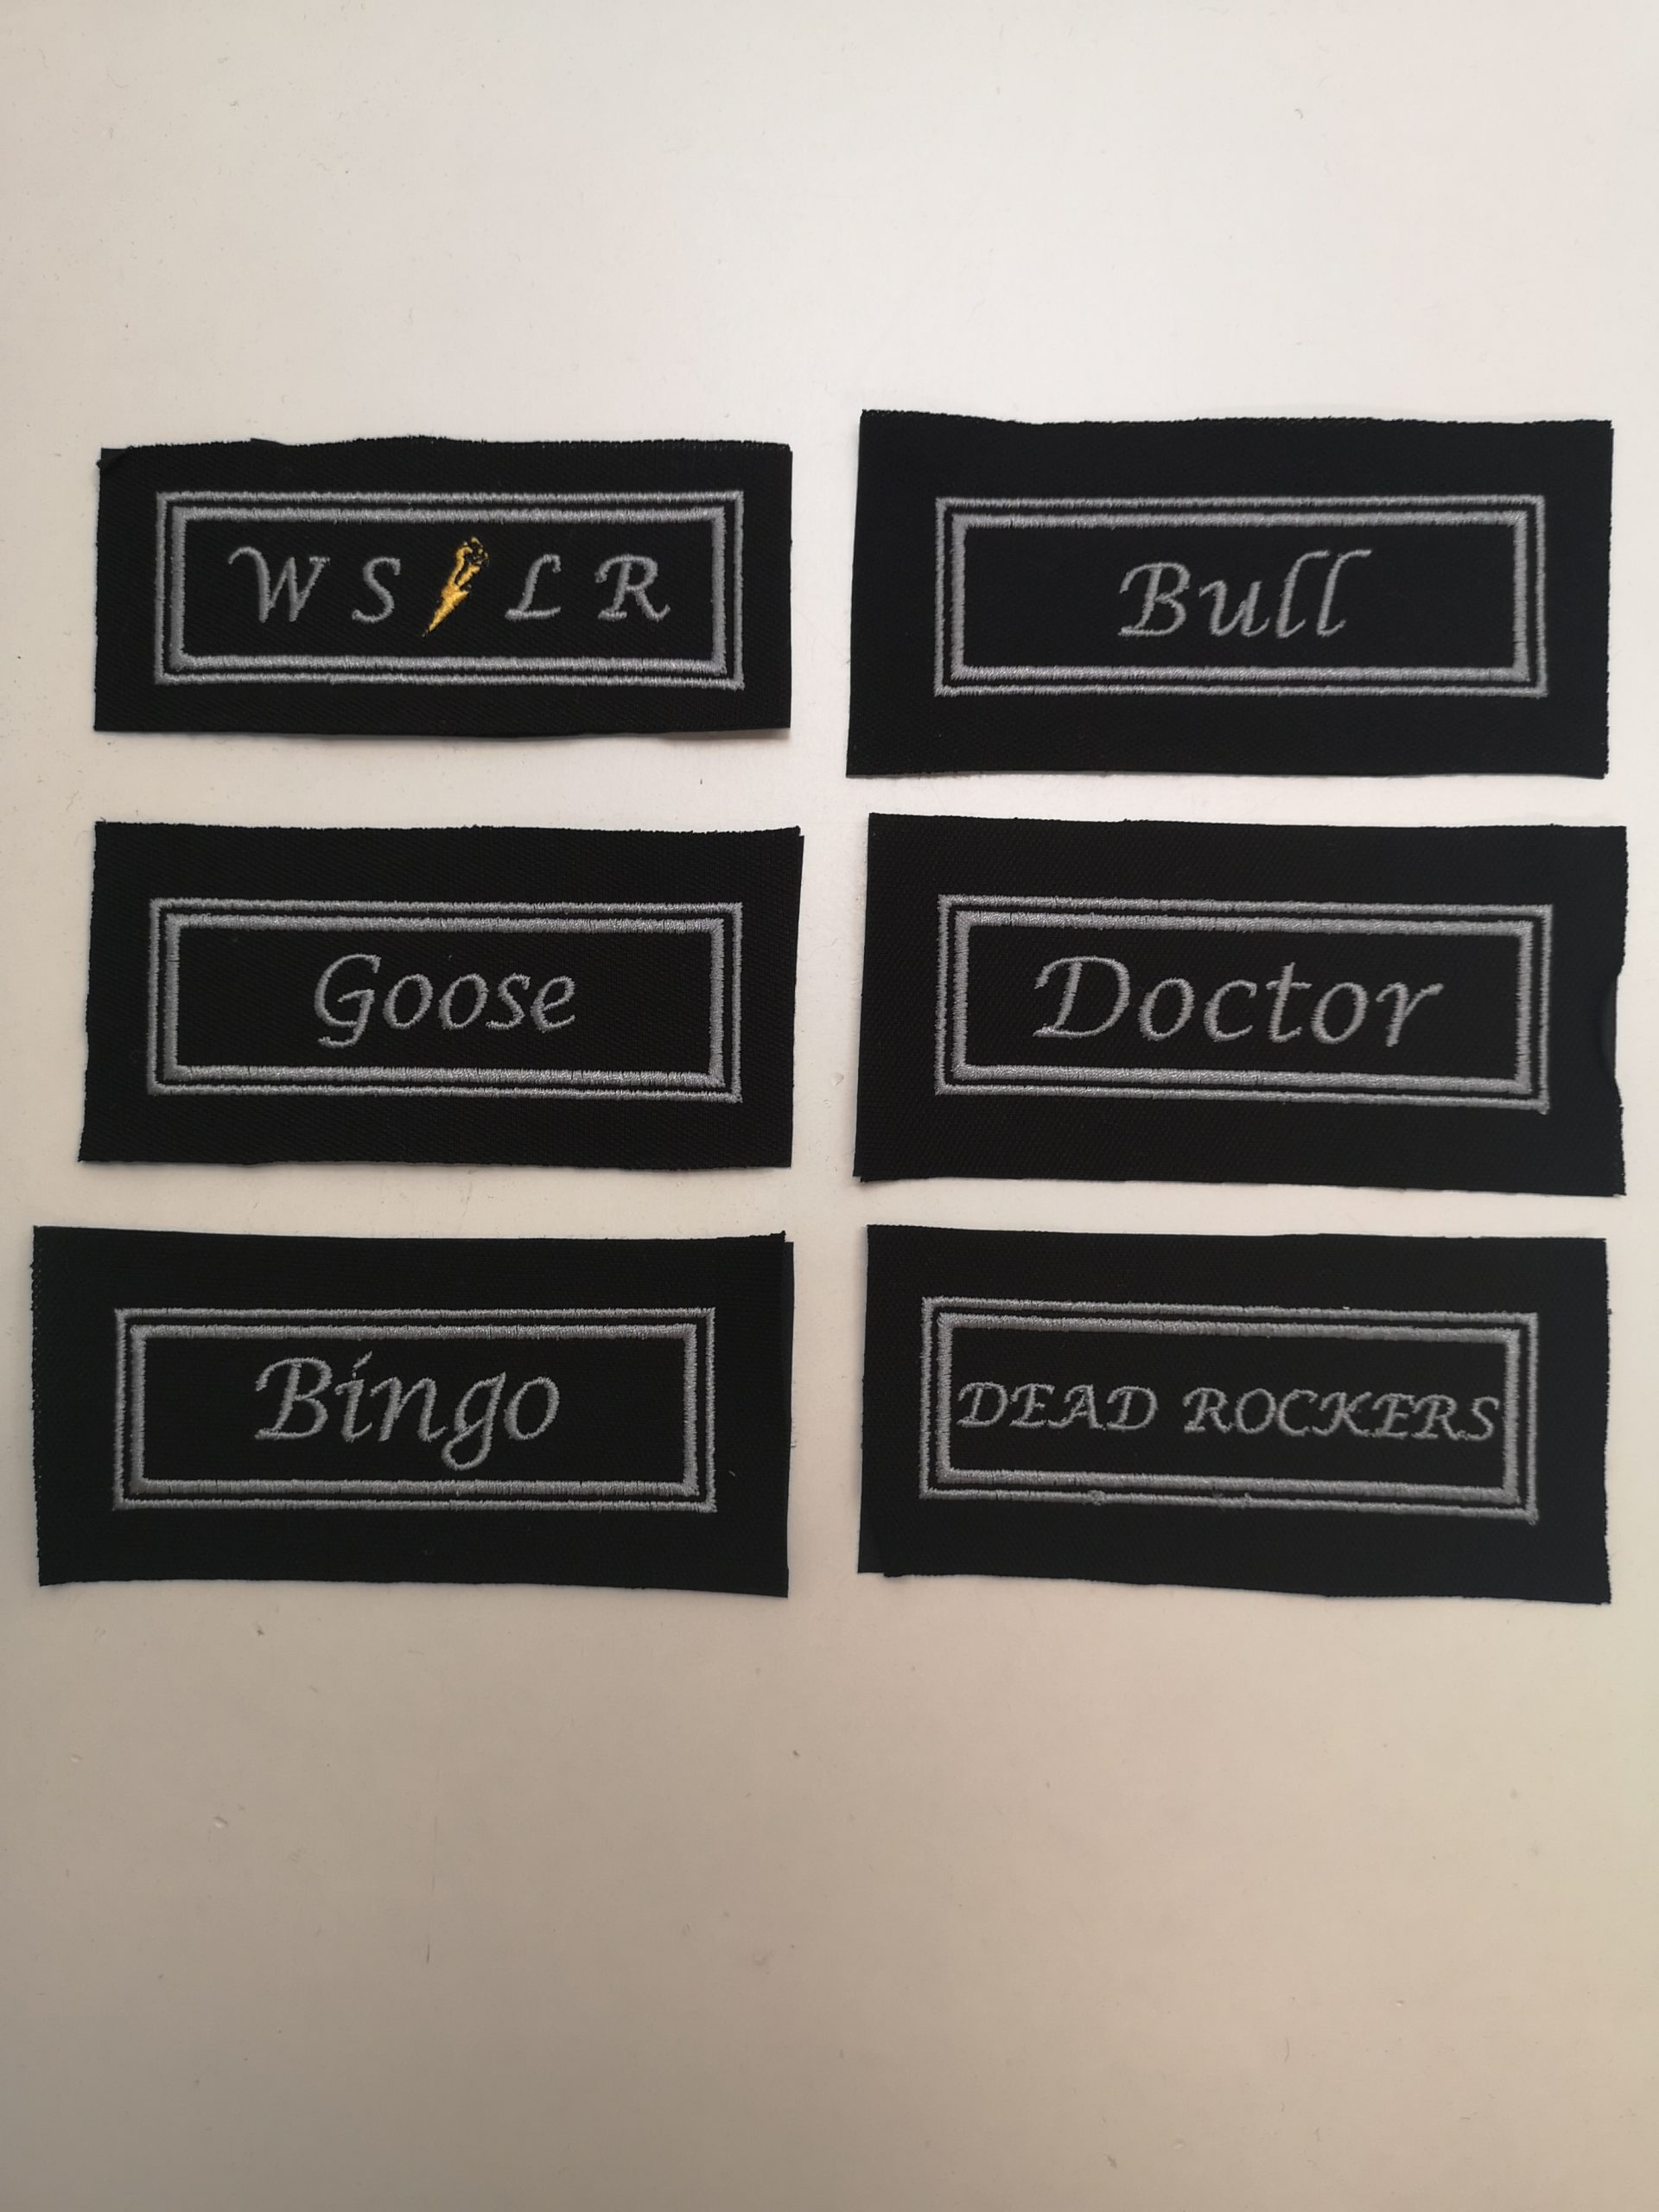 Name tapes scaled